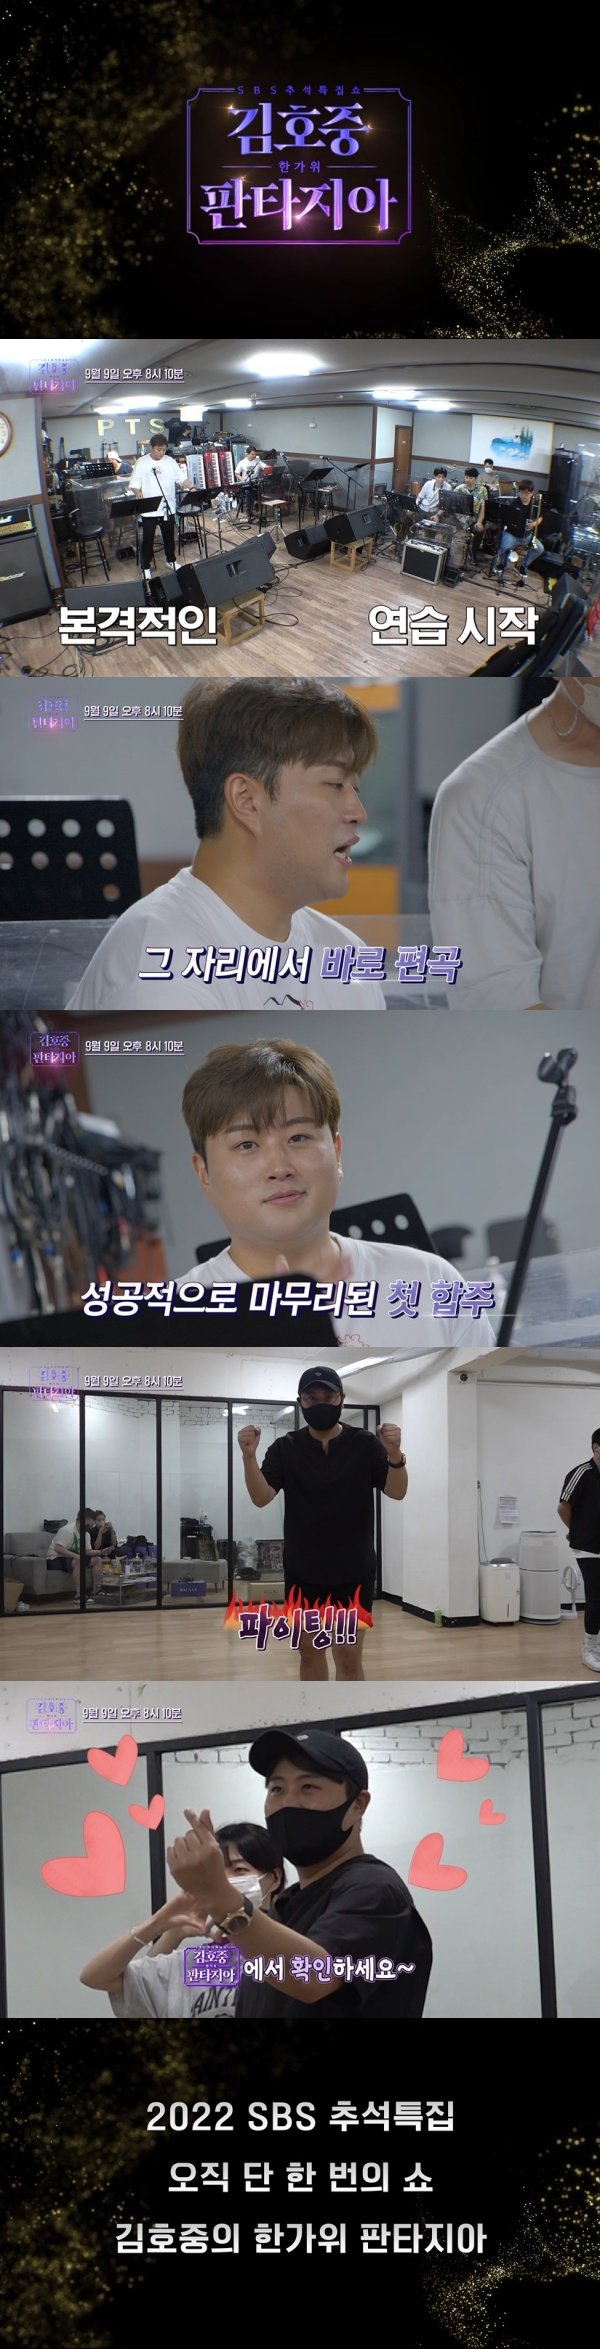 In the released digital content Fantasy Isles NO.7, Kim Ho-joong and the production team are in the midst of the meeting a month before the performance.Kim Ho-joong was cautious, actively commenting on the perfect performance.In his first concert practice, Kim Ho-joong showed a nervousness by greeting the band members to breathe together, but when the practice began, he devoted himself to professional practice.Kim Ho-joong also led the atmosphere with the appearance of Hung Ho-jung, which does not miss cute jokes.In particular, Kim Ho-joongs dance practice video, which he cited as a weakness, was also released for the first time.Kim Ho-joong, who started practicing his first song with the choreography team, suffered a crisis due to an input error at the beginning of the practice, but soon he used the perfect diamond step and caused the latent dance DNA.The choreography team suggested cute choreography to Kim Ho-joong during the practice process, saying, You have to do something so cute. Kim Ho-joong laughed because he was worried about how much.The SBS Chuseok special show Han Gawi Fantasia of Kim Ho-joong will air at 8:10 p.m. on the 9th (Friday).